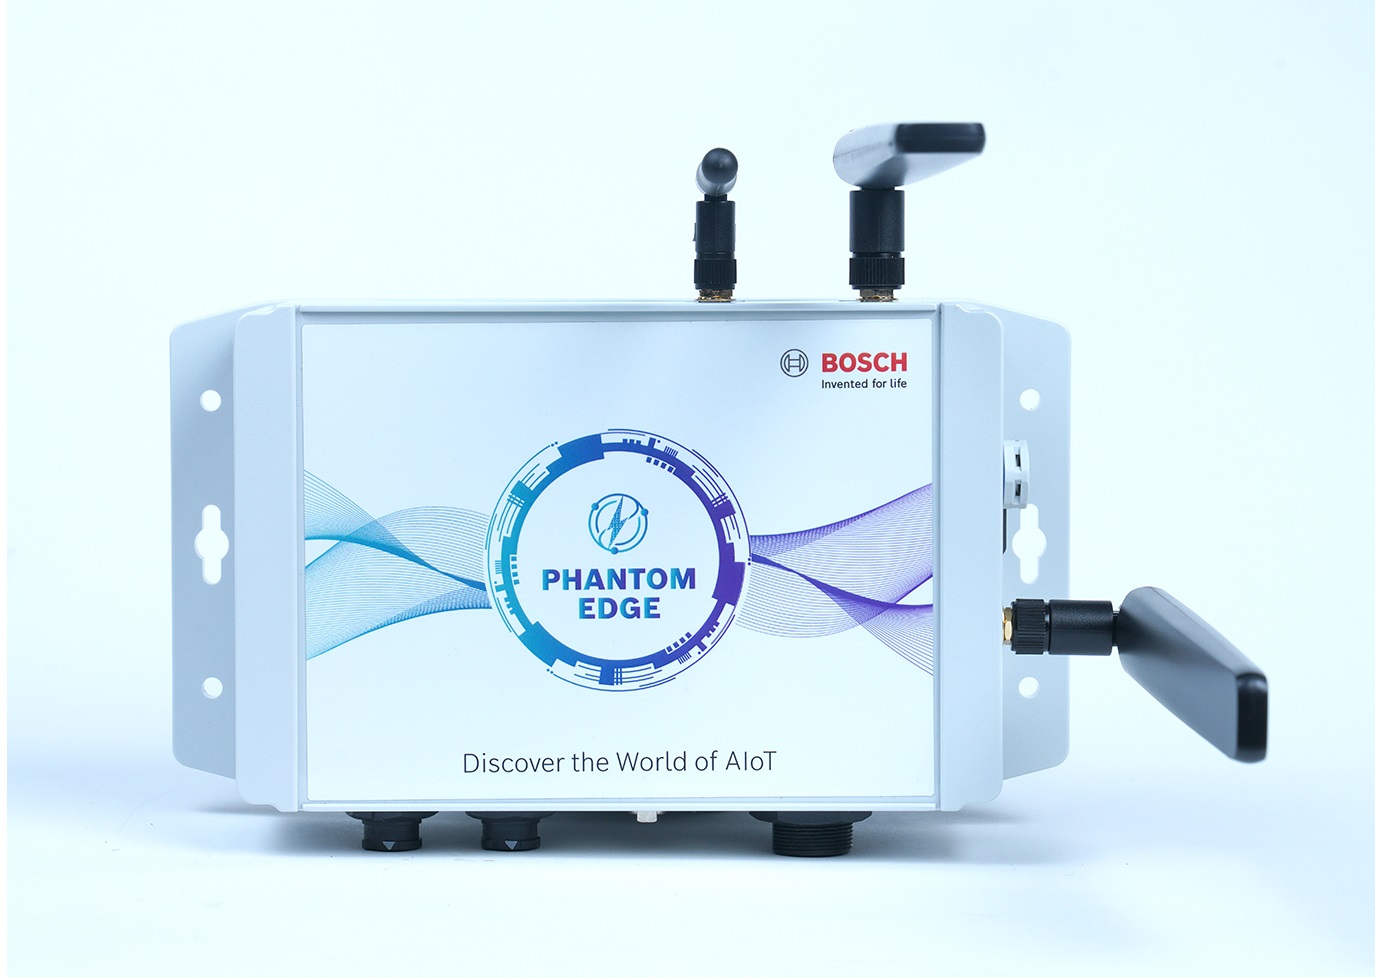 Bosch Launches The New Phantom Edge In The UAE